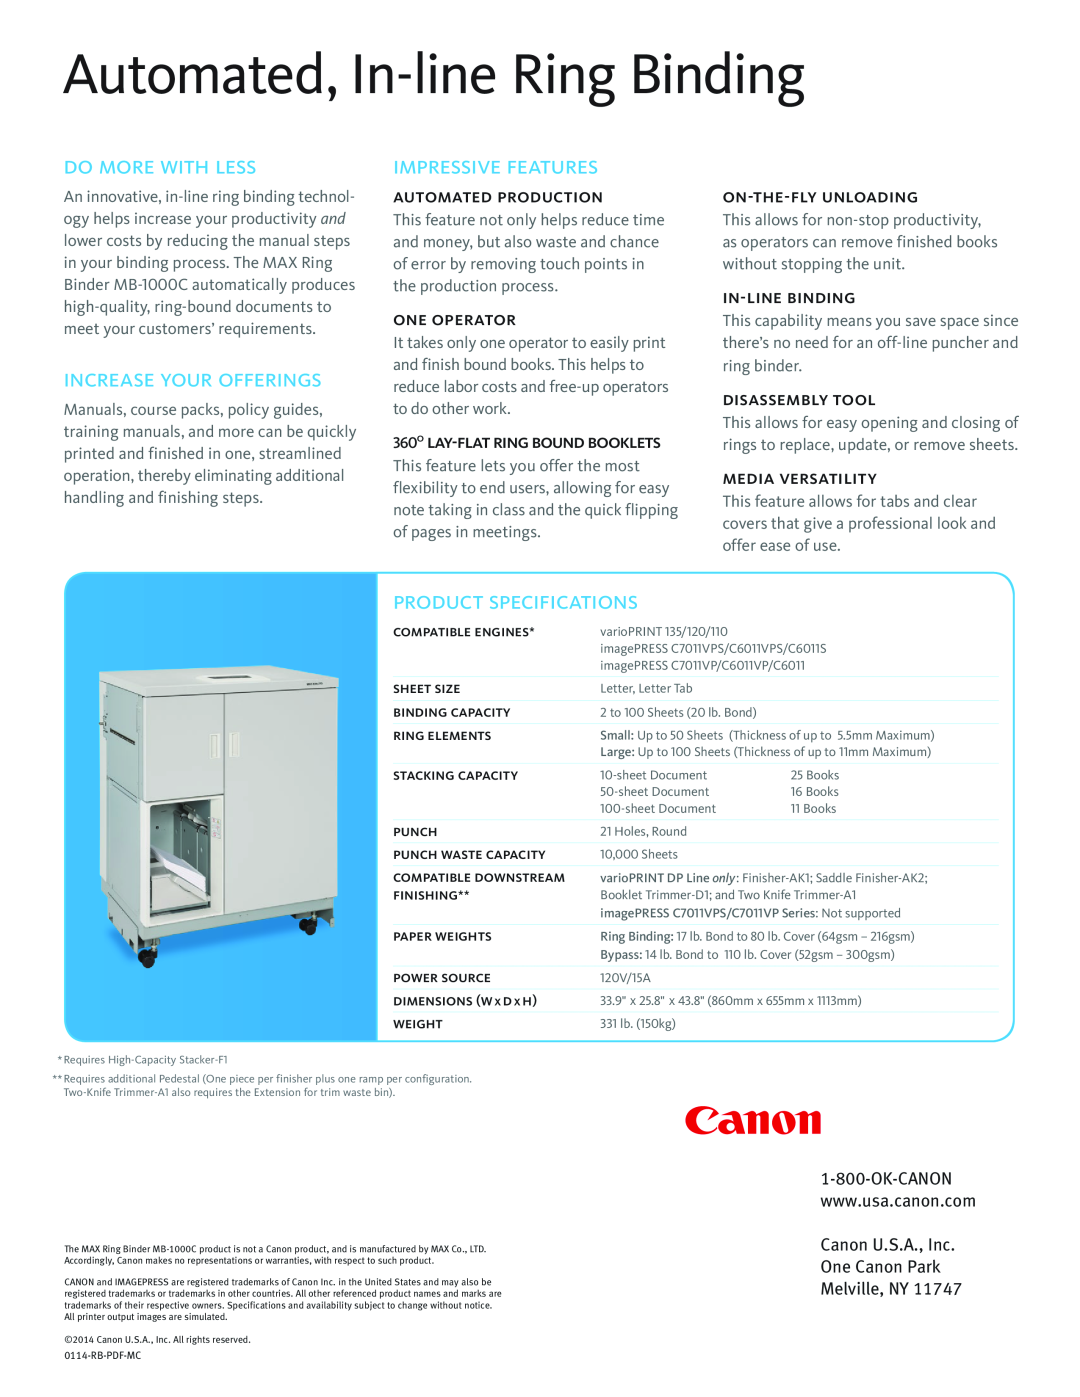 Canon MB-1000C manual Automated, In-lineRing Binding, Do More With Less, Increase Your Offerings, Impressive Features 